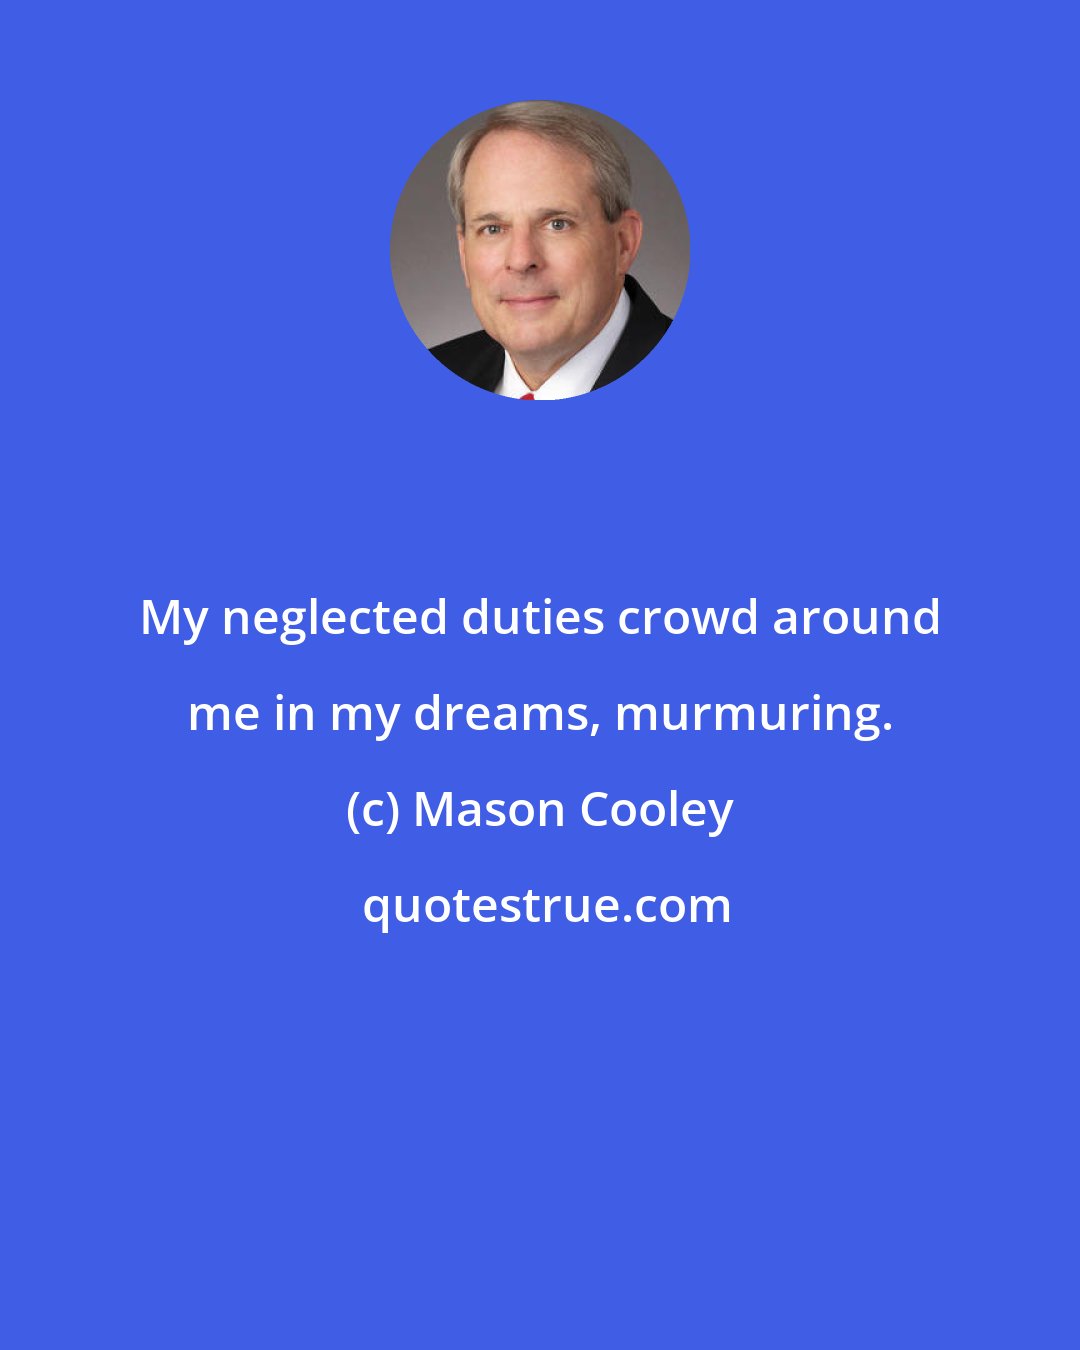 Mason Cooley: My neglected duties crowd around me in my dreams, murmuring.